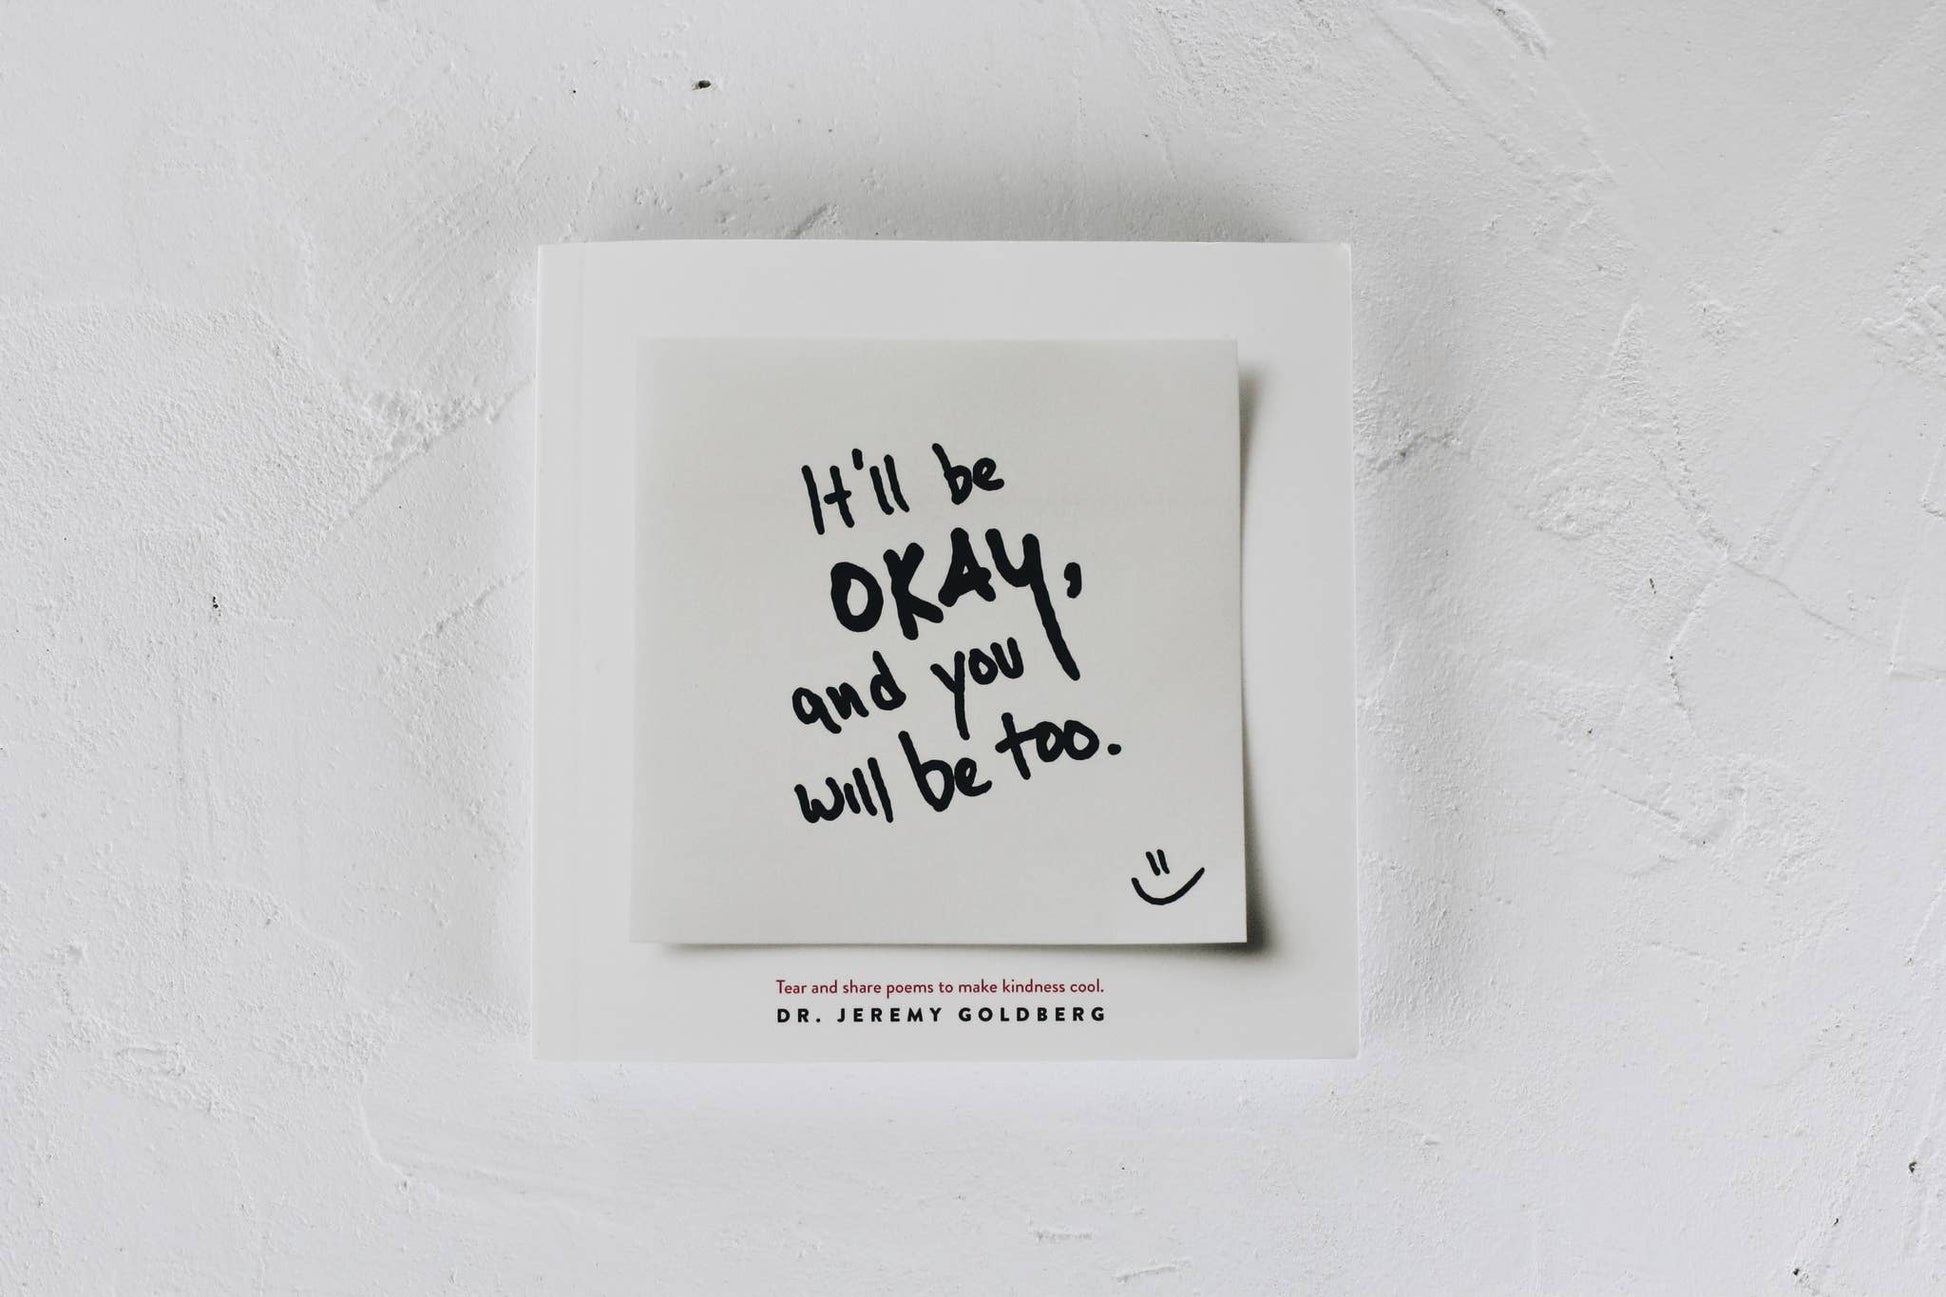 It'll Be Okay, And You Will Be Too - book Thought Catalog